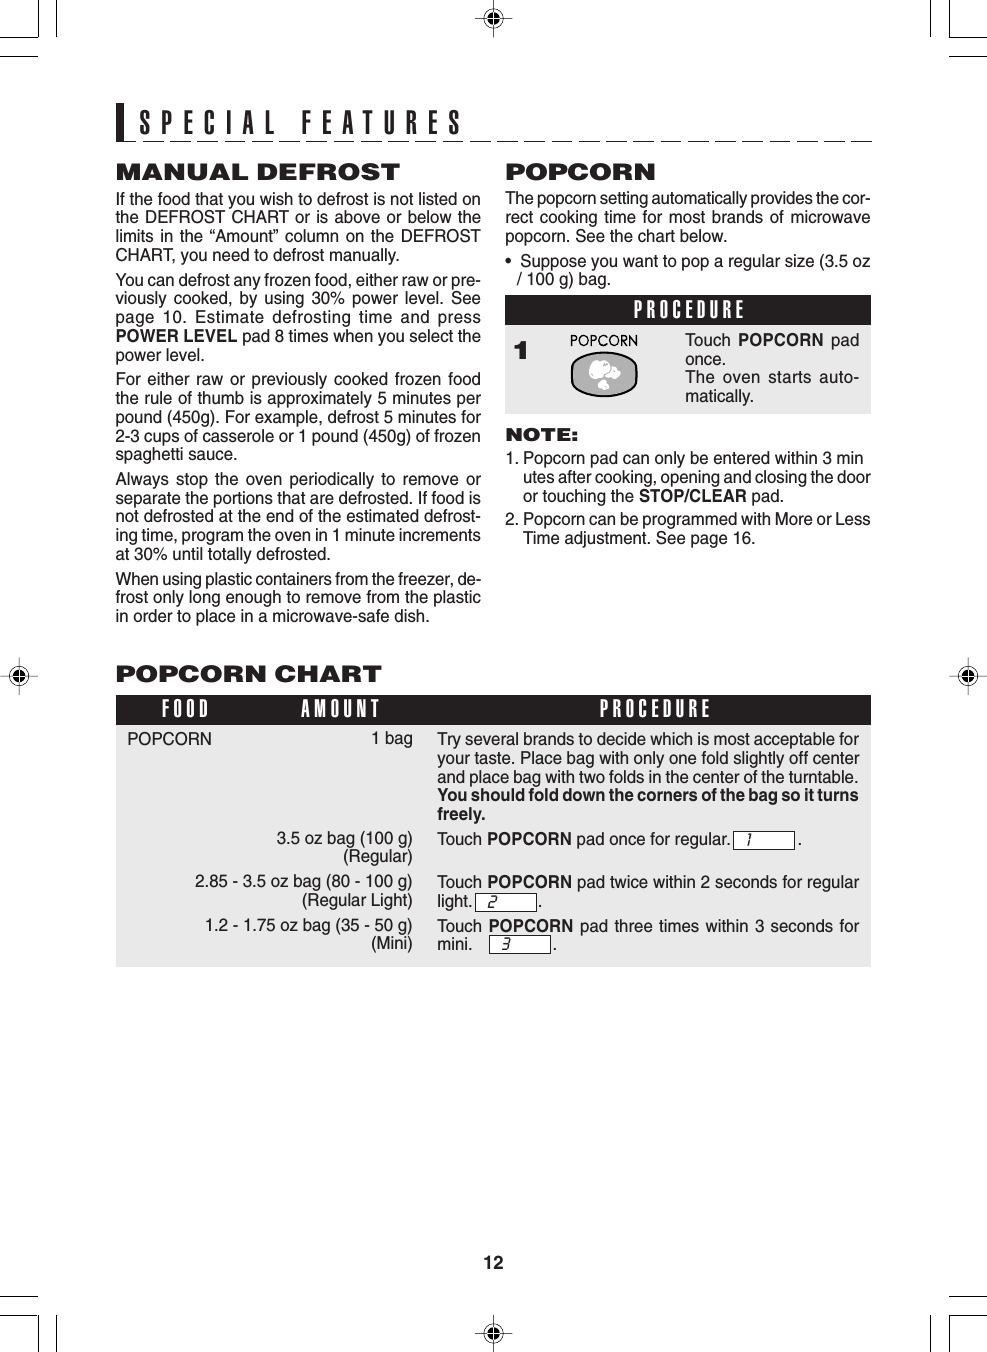 12POPCORN CHART1 bag3.5 oz bag (100 g)(Regular)2.85 - 3.5 oz bag (80 - 100 g)(Regular Light)1.2 - 1.75 oz bag (35 - 50 g)(Mini)POPCORNFOOD PROCEDUREAMOUNTMANUAL DEFROSTIf the food that you wish to defrost is not listed onthe DEFROST CHART or is above or below thelimits in the “Amount” column on the DEFROSTCHART, you need to defrost manually.You can defrost any frozen food, either raw or pre-viously cooked, by using 30% power level. Seepage 10. Estimate defrosting time and pressPOWER LEVEL pad 8 times when you select thepower level.For either raw or previously cooked frozen foodthe rule of thumb is approximately 5 minutes perpound (450g). For example, defrost 5 minutes for2-3 cups of casserole or 1 pound (450g) of frozenspaghetti sauce.Always stop the oven periodically to remove orseparate the portions that are defrosted. If food isnot defrosted at the end of the estimated defrost-ing time, program the oven in 1 minute incrementsat 30% until totally defrosted.When using plastic containers from the freezer, de-frost only long enough to remove from the plasticin order to place in a microwave-safe dish.POPCORNThe popcorn setting automatically provides the cor-rect cooking time for most brands of microwavepopcorn. See the chart below.•  Suppose you want to pop a regular size (3.5 oz/ 100 g) bag.PROCEDURE1Touch  POPCORN padonce.The oven starts auto-matically.NOTE:1. Popcorn pad can only be entered within 3 minutes after cooking, opening and closing the dooror touching the STOP/CLEAR pad.2. Popcorn can be programmed with More or LessTime adjustment. See page 16.SPECIAL FEATURESTry several brands to decide which is most acceptable foryour taste. Place bag with only one fold slightly off centerand place bag with two folds in the center of the turntable.You should fold down the corners of the bag so it turnsfreely.Touch POPCORN pad once for regular. .Touch POPCORN pad twice within 2 seconds for regularlight. .Touch  POPCORN pad three times within 3 seconds formini. .132